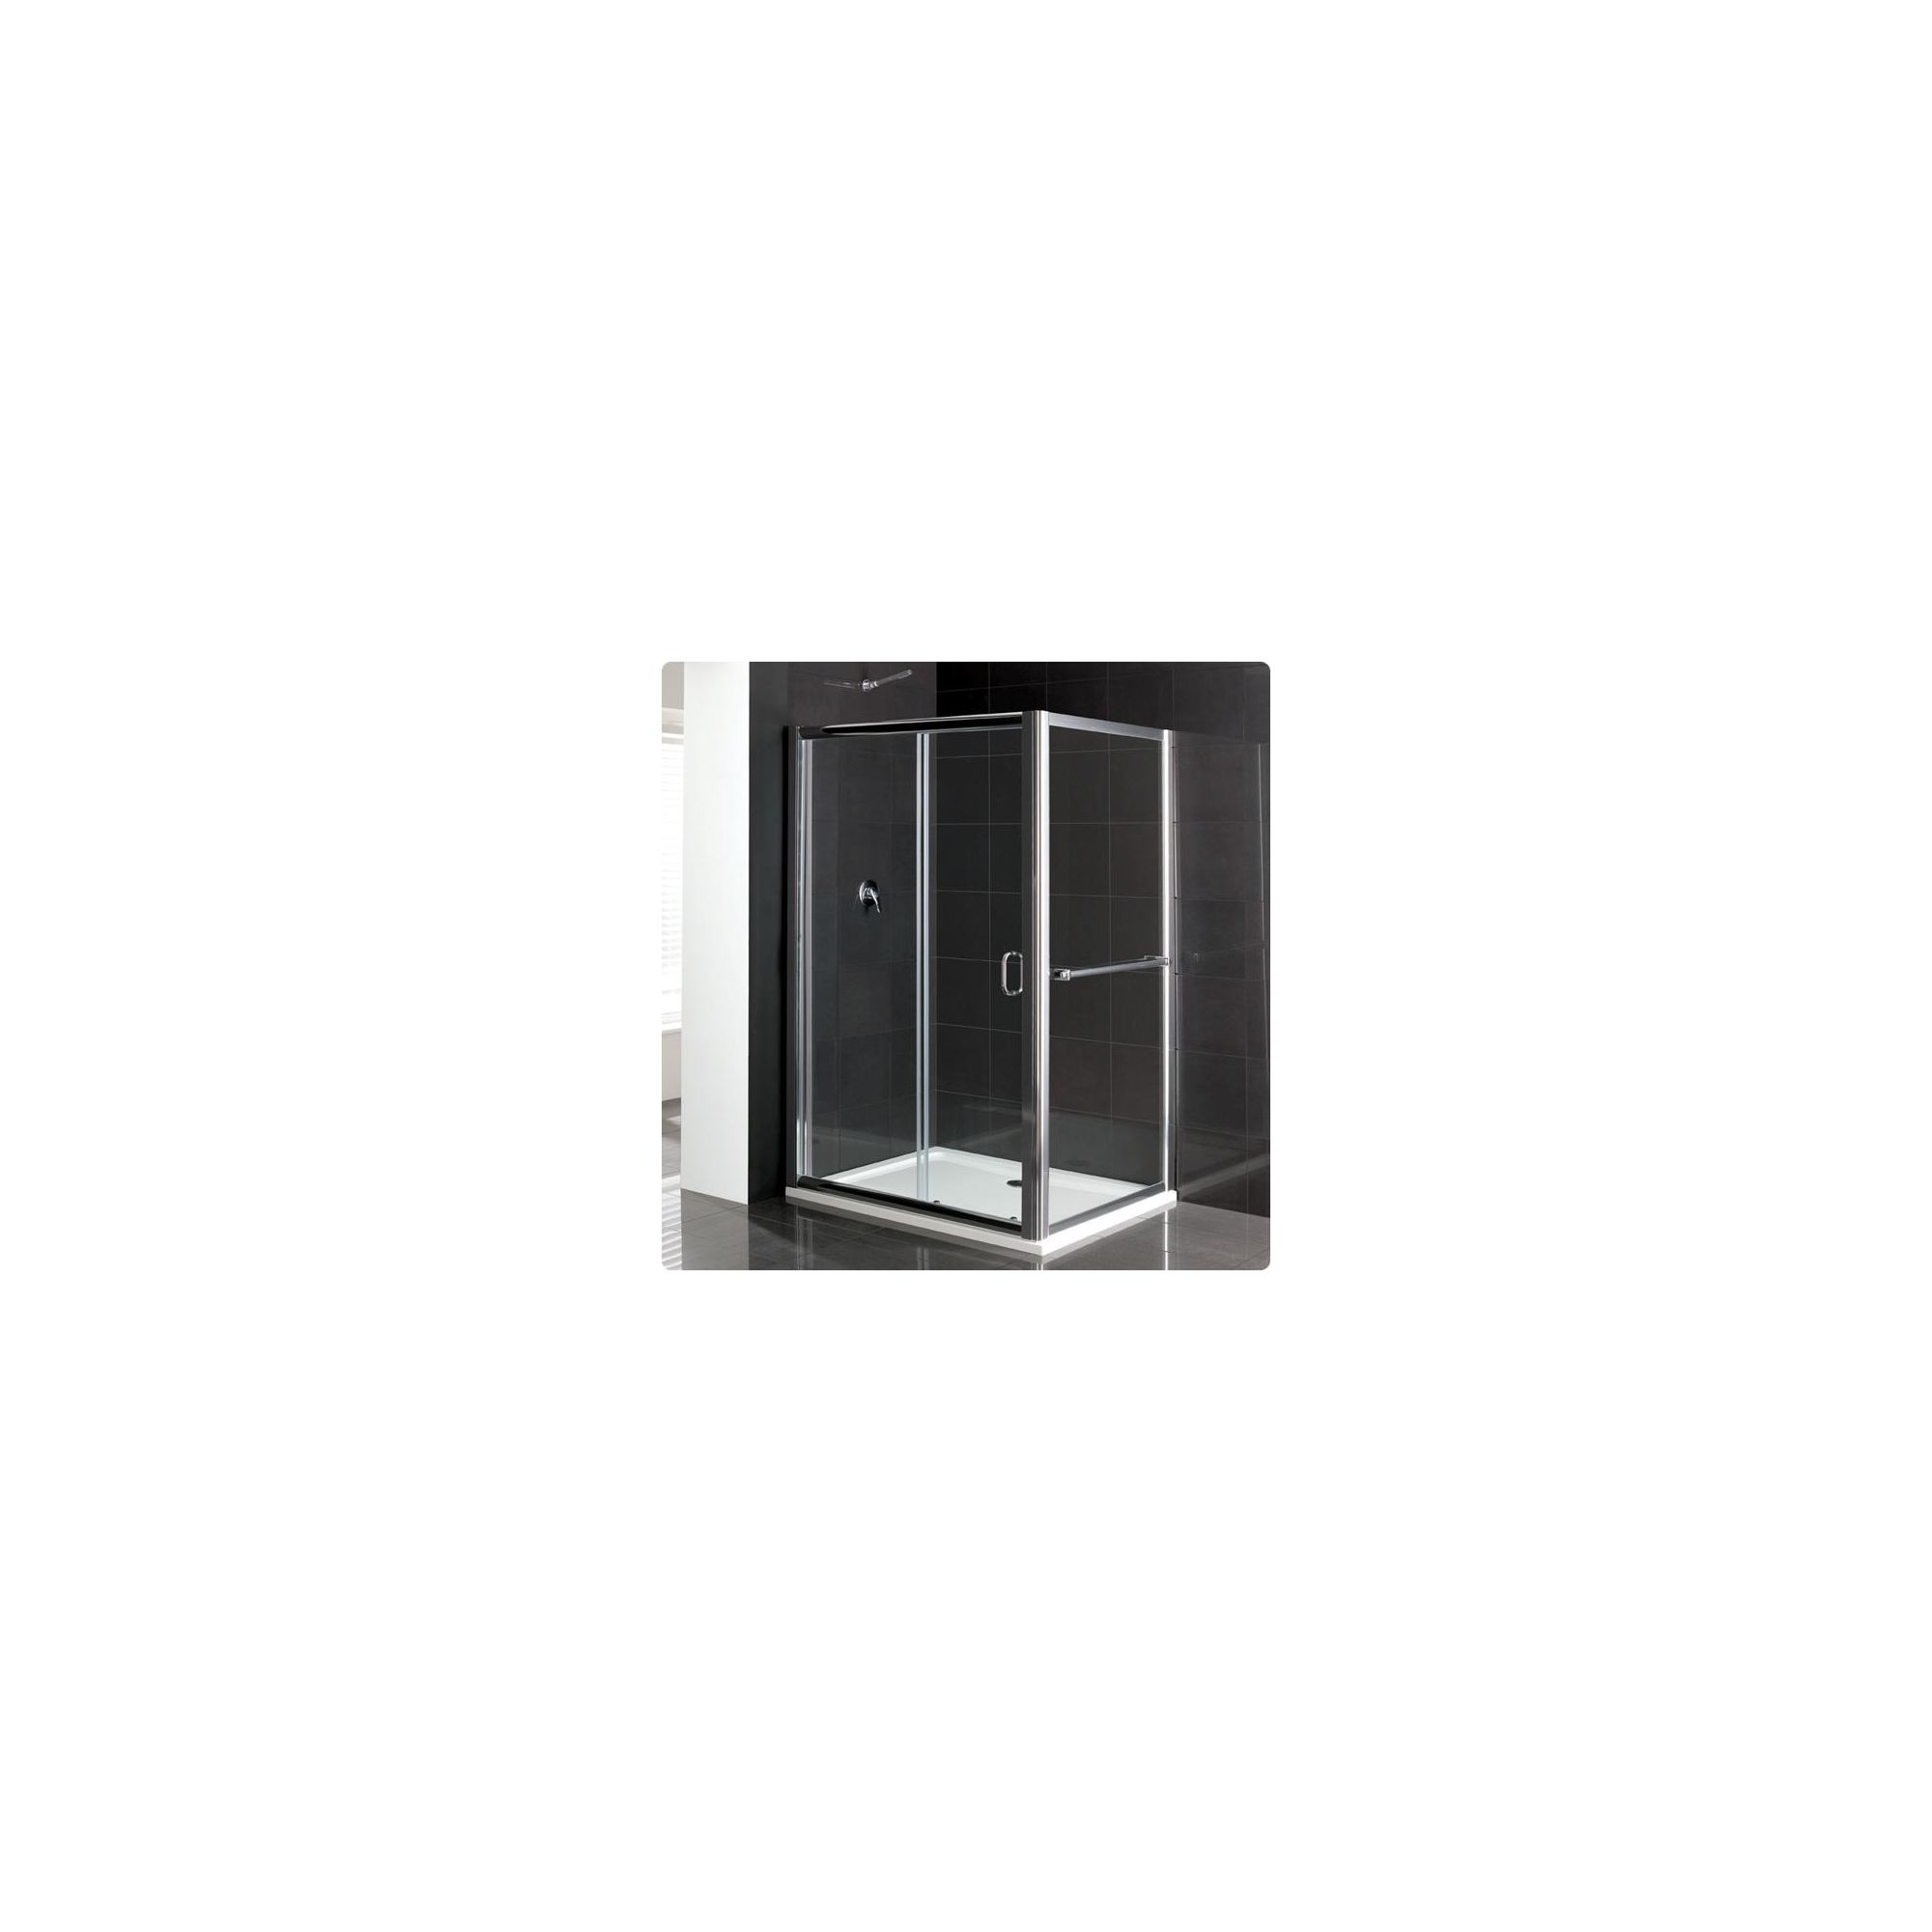 Duchy Elite Silver Sliding Door Shower Enclosure with Towel Rail, 1600mm x 900mm, Standard Tray, 6mm Glass at Tescos Direct